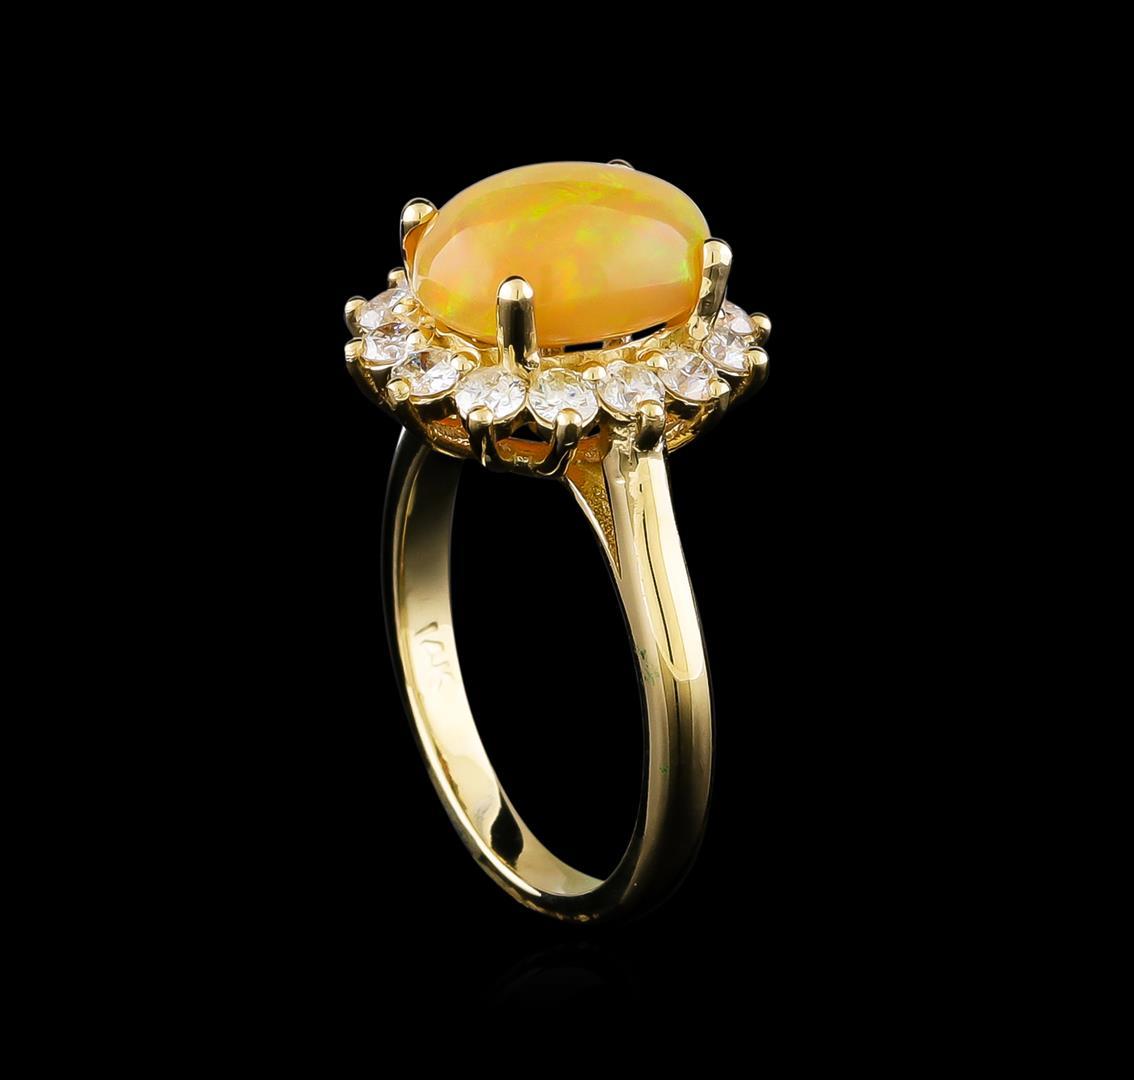 2.74 ctw Opal and Diamond Ring - 14KT Yellow Gold